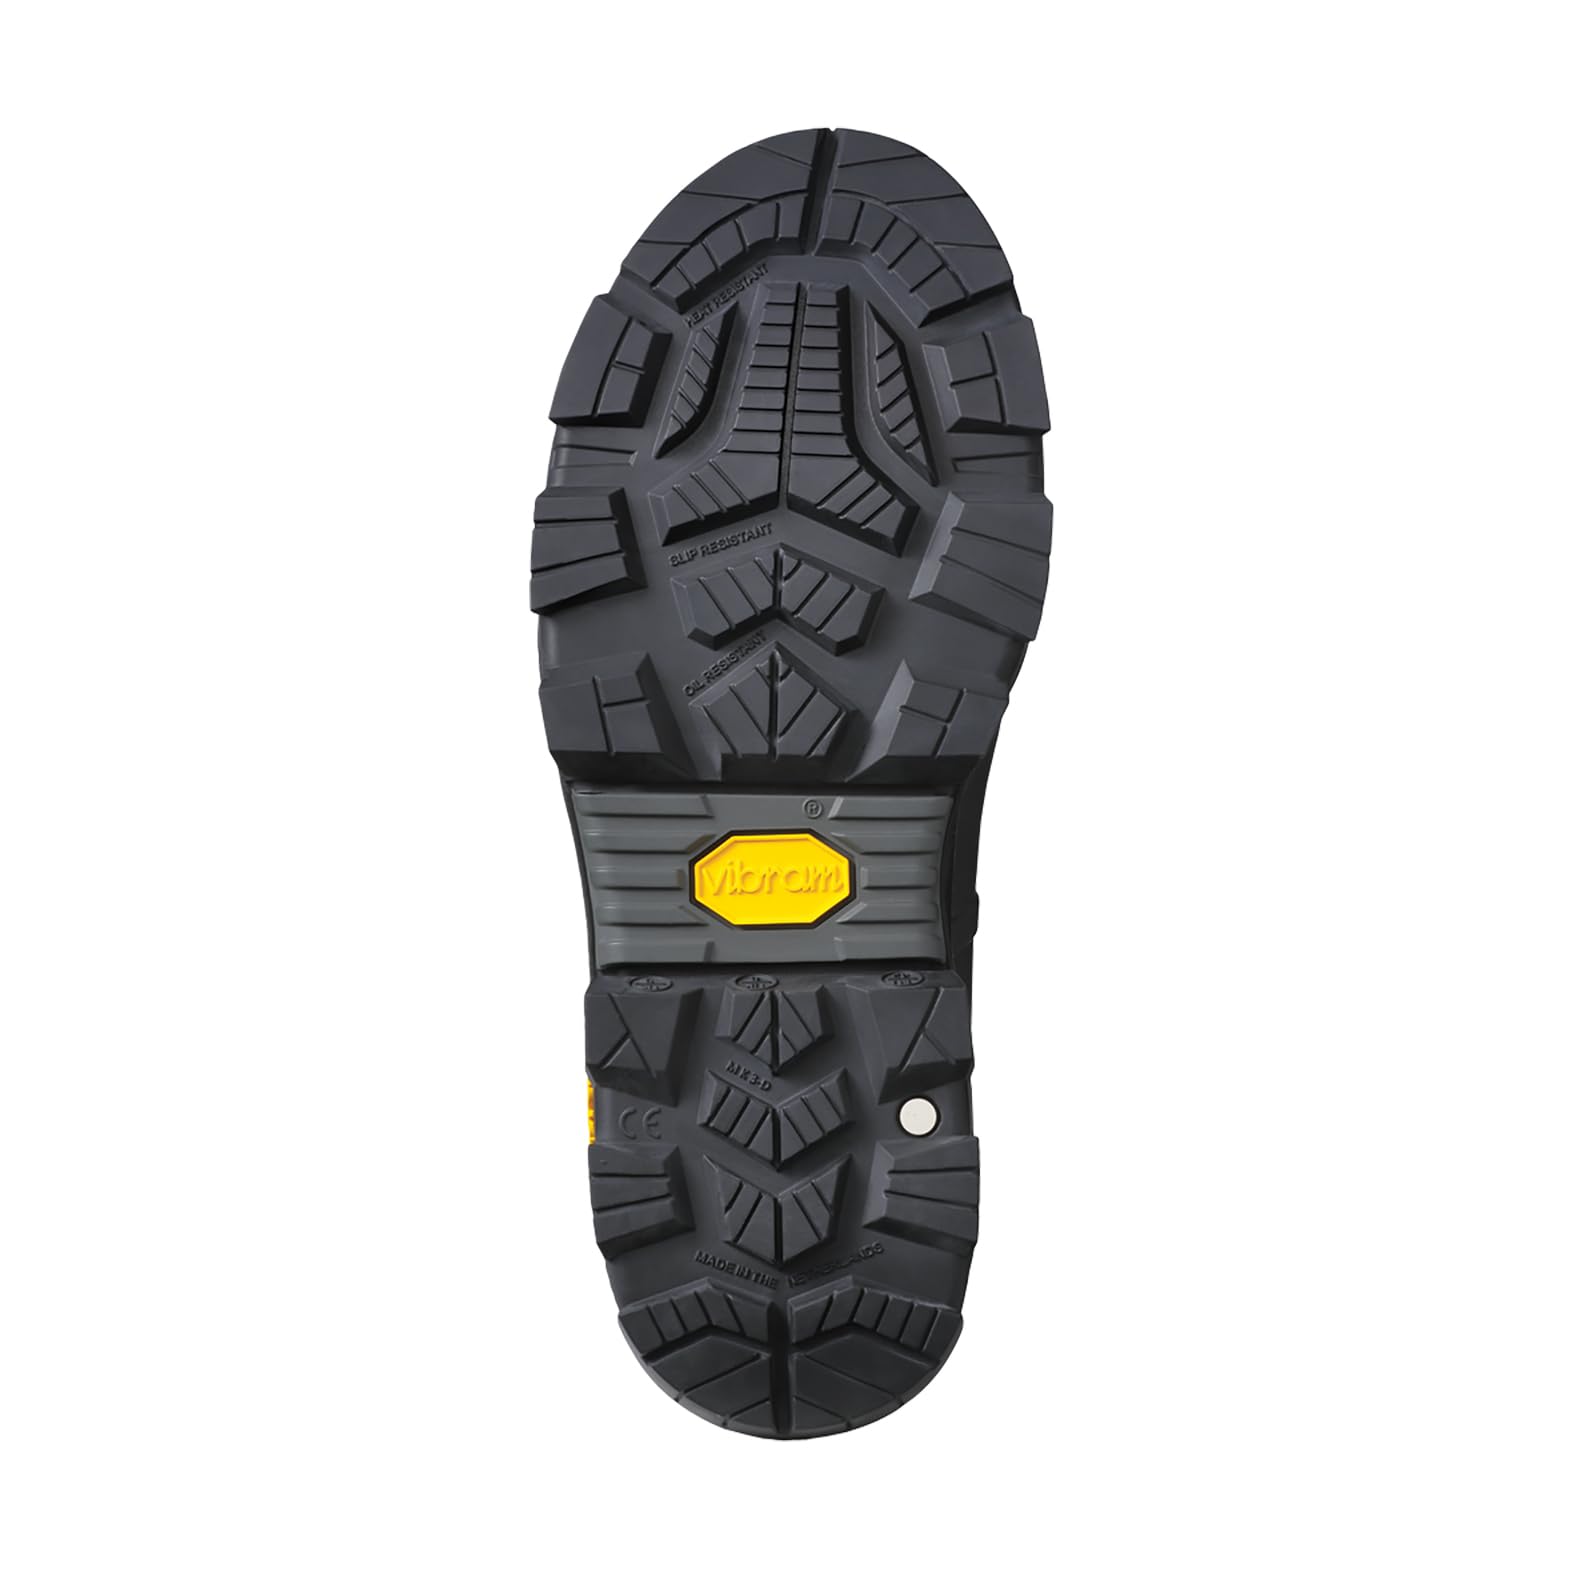 DUNLOP Men's CC22A33 Purofort+ Expander Full Safety with Vibram Sole,100% Waterproof,PVC, Lightweight and Durable Protective Footwear, Black, 12